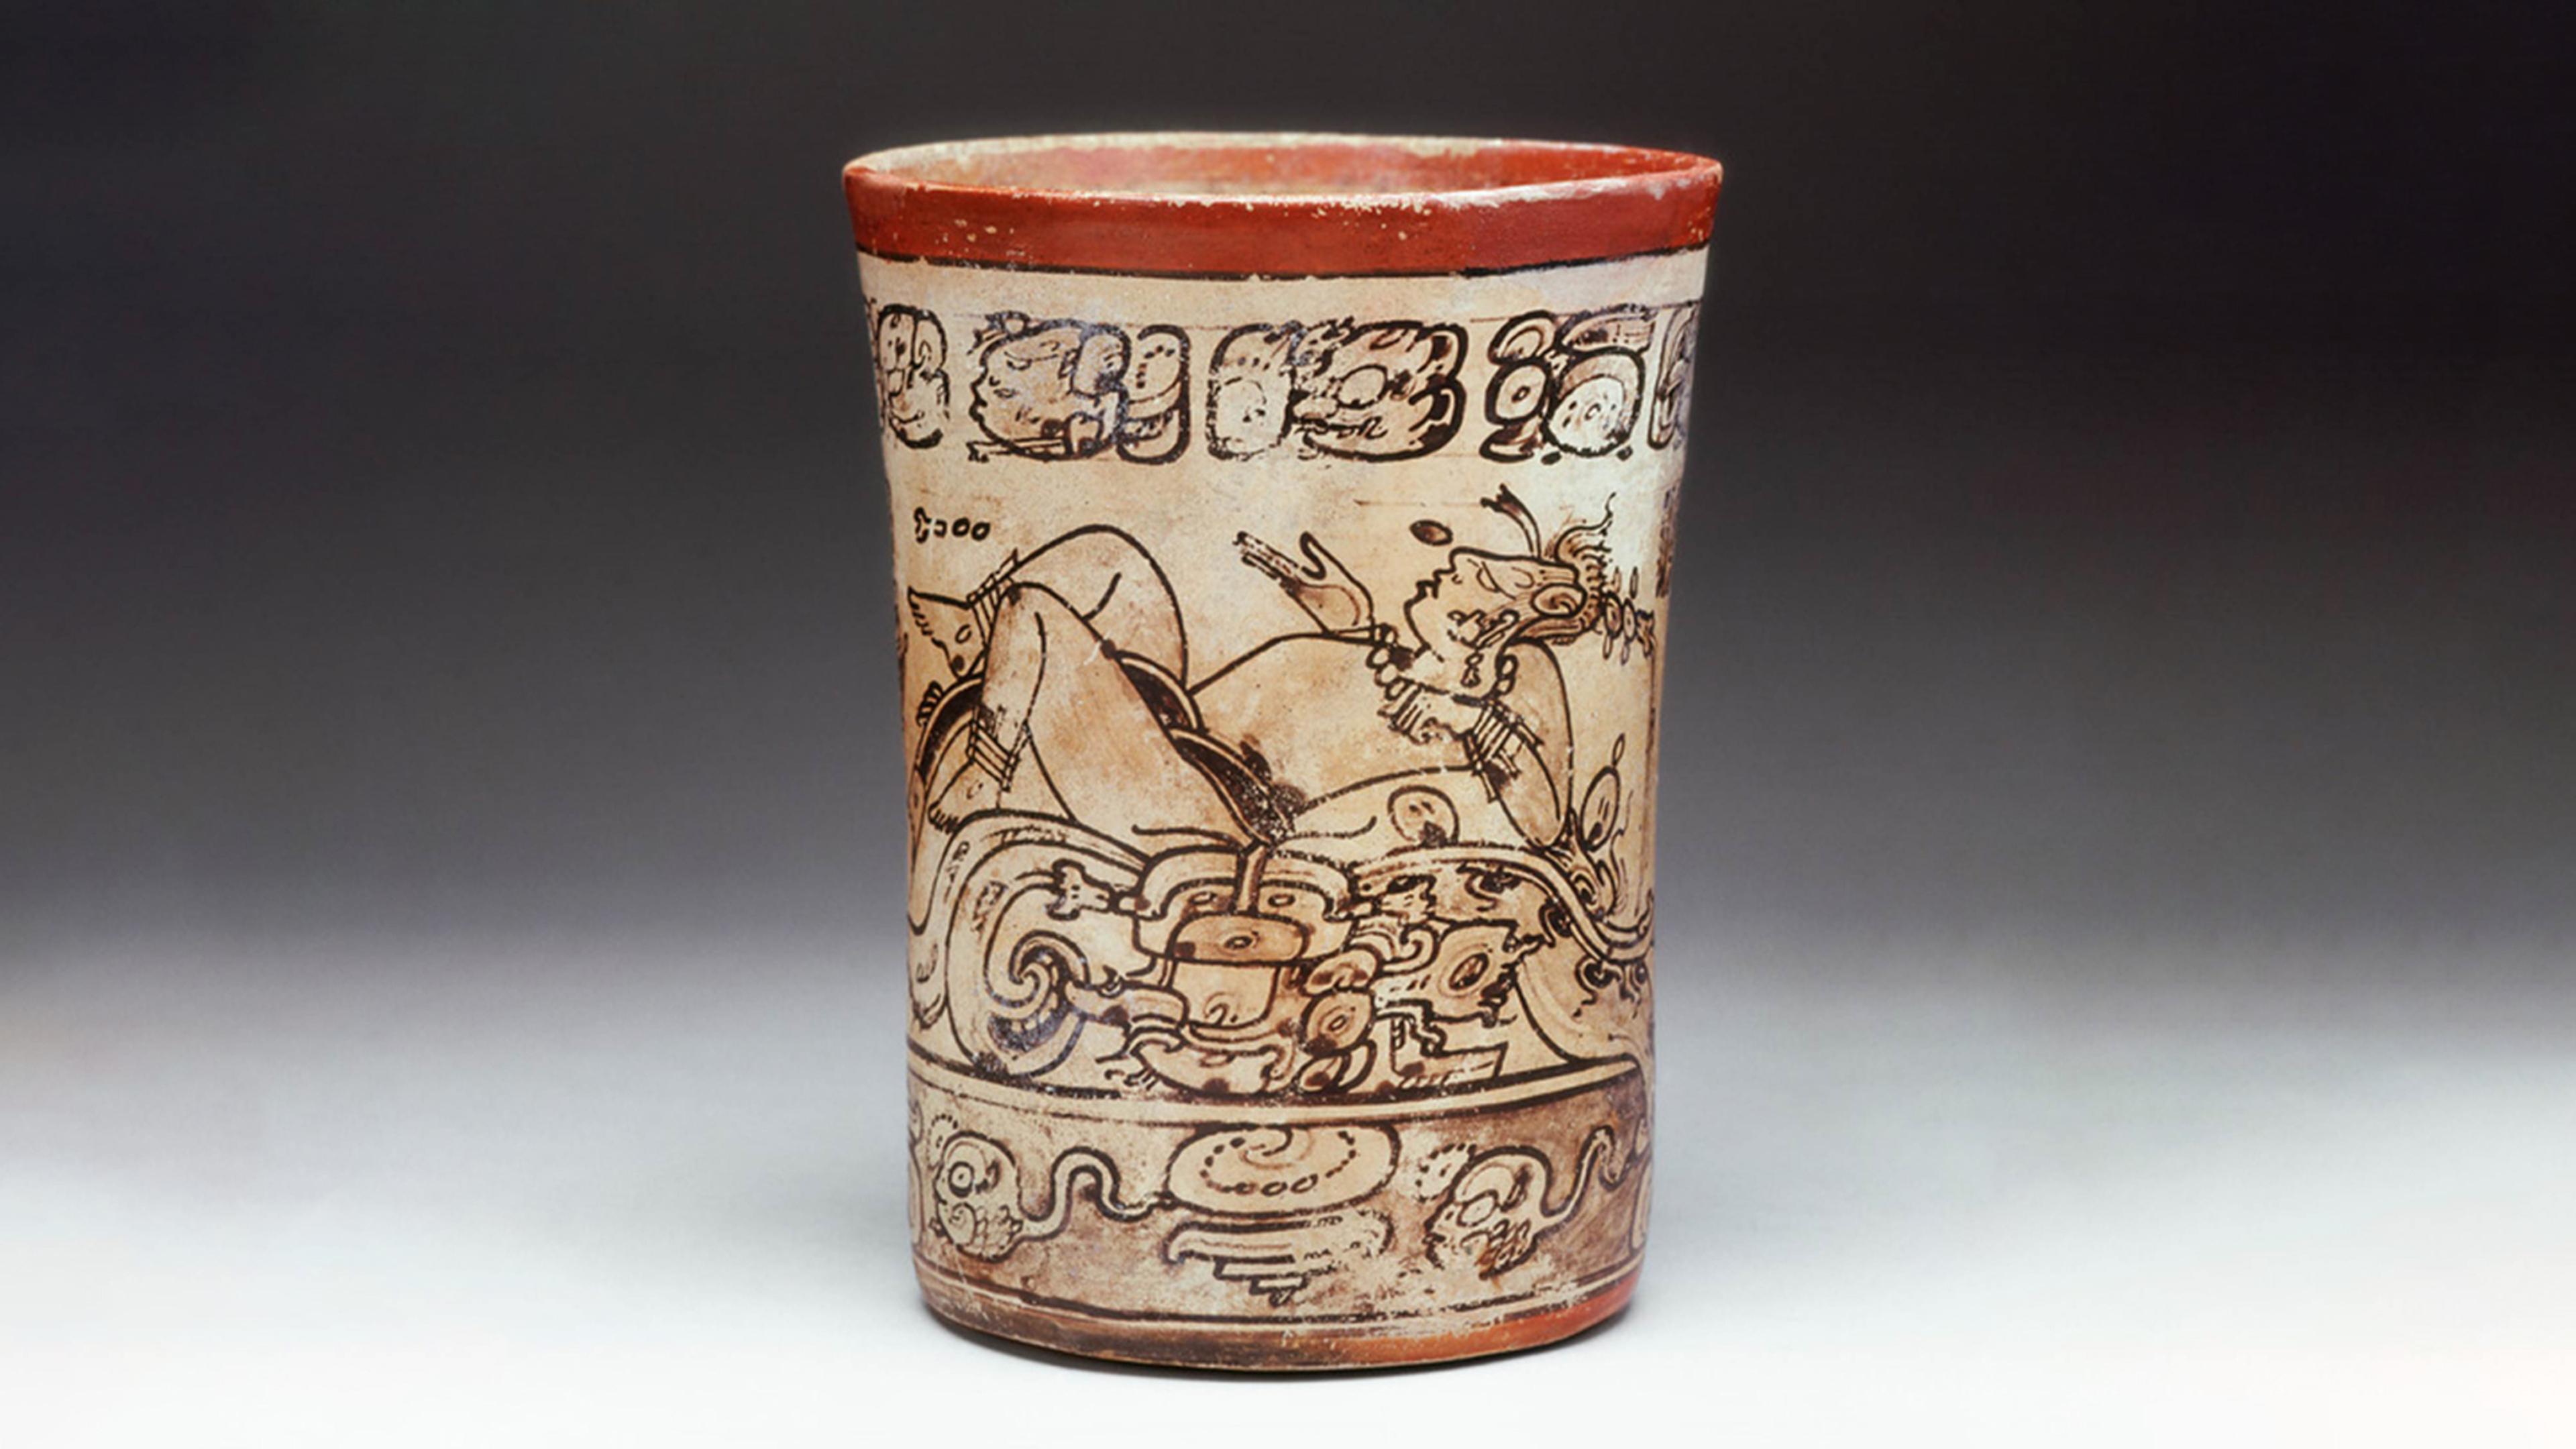 Image of cylindrical vessel with orange rim and tan body, with illustration of the Maize God on surface surrounded by patterns.